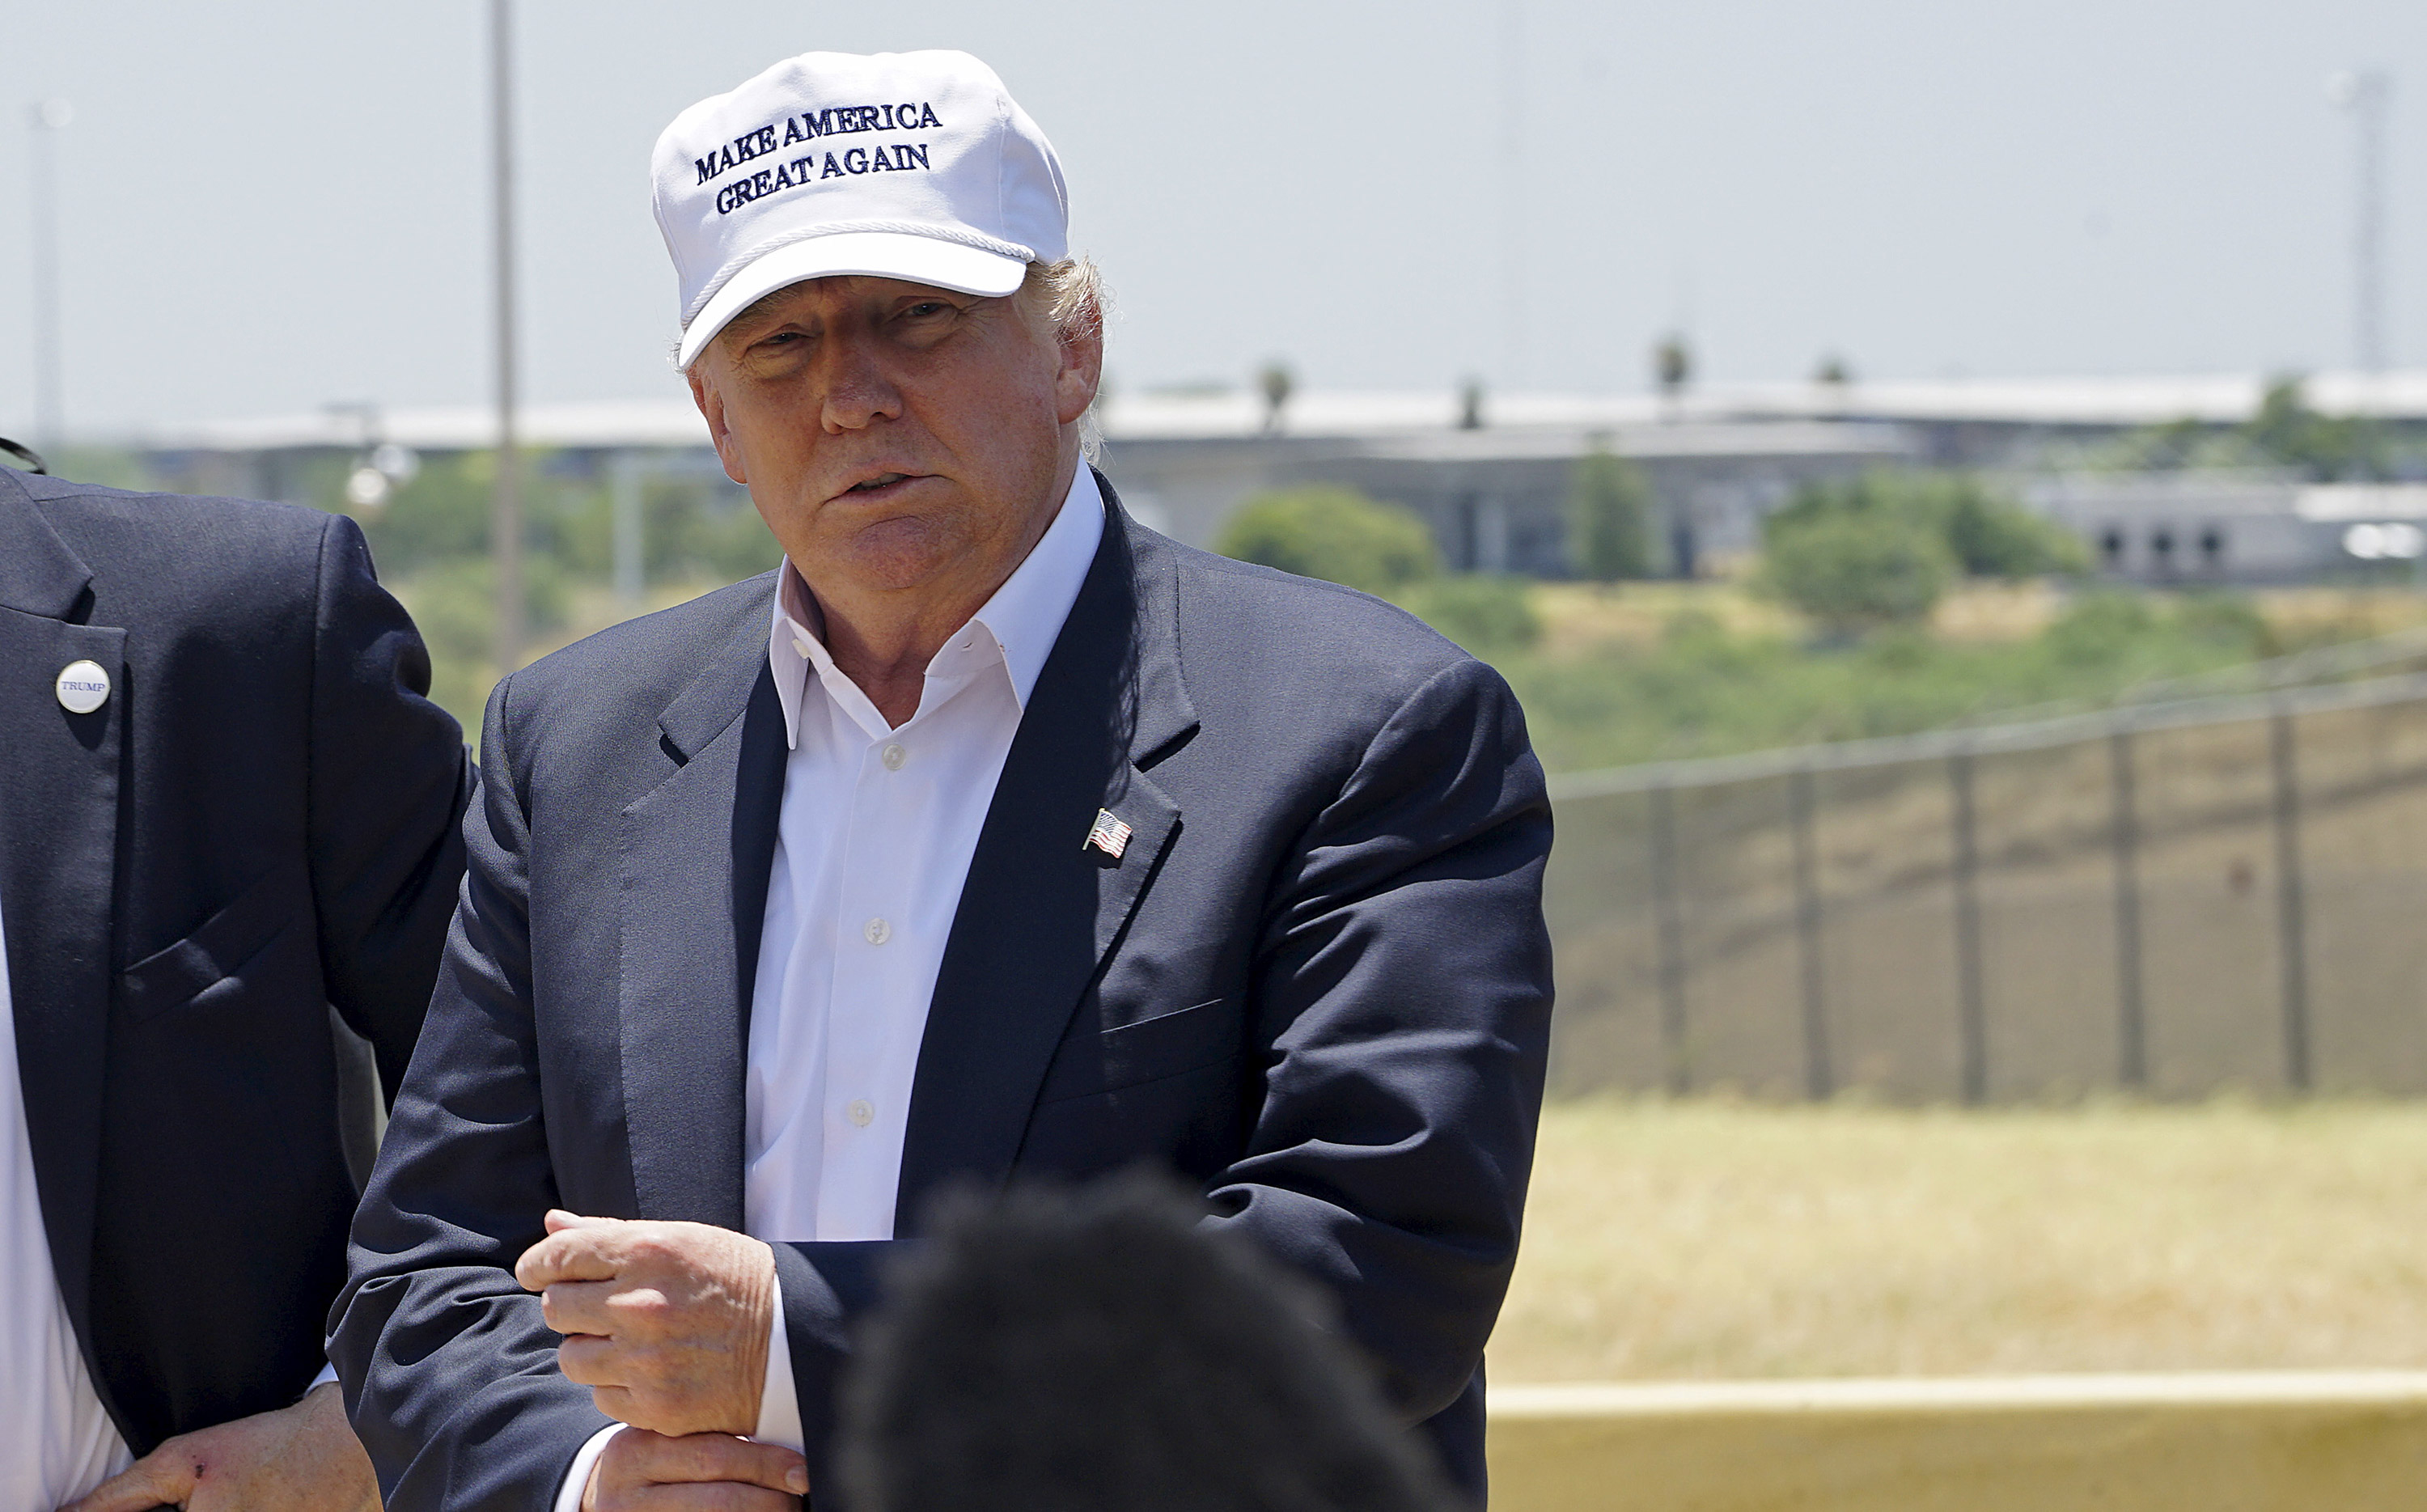 Republican presidential candidate Donald Trump attends a news conference near the U.S.-Mexico border (background), outside Laredo, Texas July 23, 2015. 